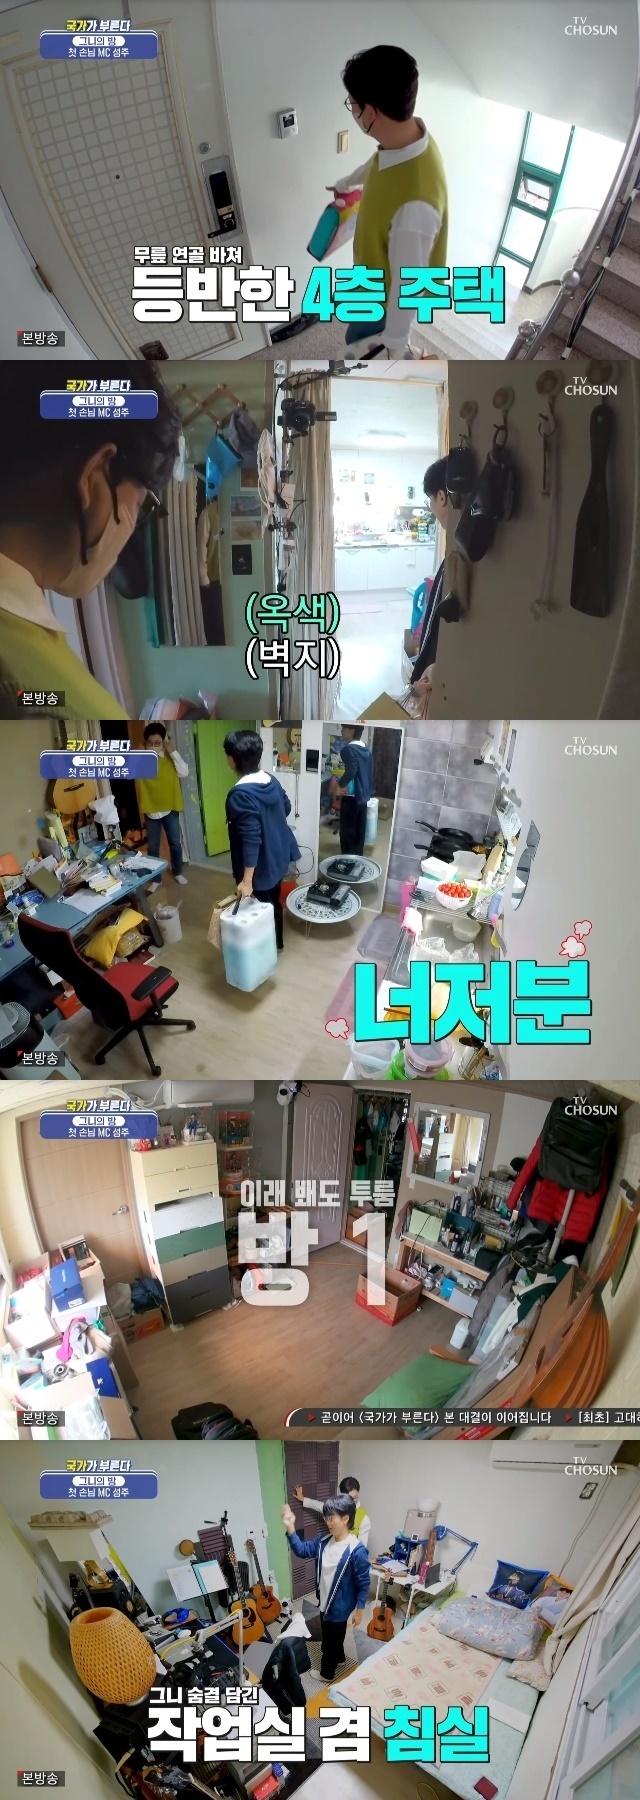 Chang-geun park, which received 300 million won in prize money, was still living in a 13-pyeong villa.He had time to get close to Kim Seong-joo and was embarrassed to reveal his family history with his father, who was stained with love.In the 9th episode of the TV Chosun entertainment Secret Agent Miss Oh (hereinafter referred to as Nationality Department) broadcast on April 14, Kim Seong-joo visited the house of chang-geun park.On this day, Kim Seong-joo found a villa without an elevator with a gift such as detergent and tissue paper.This is the house of Chang-geun park, the main character of 300 million prize money. Kim Seong-joo looked at the inside of the house with two rooms in 13 pyeong following the villa structure that had to go up the stairs.Kim Seong-joo also had a similar experience in the past when he had just arrived.Kim Seong-joo had a gift-opening time: not only detergents and tissues, but also blue and red underwear, as well as vocal cords that Lim Young-woong and Jang Min-Ho enjoyed.Kim Seong-joo told the chang-geun park, which misinterpreted vocal cords as sexual treatment drugs, Sex vocal cords, vocal cords, you will get a lot of help.I ate Jang Min-Ho and I ate Lim Young-woong and I knew everything. I had to introduce Chang-geun park. Chang-geun park said Kim Seong-joo was the first friend to come to his house and said, There is no friend in the neighborhood.Kim Seong-joo said that the two are not only the same age as the 1972 ones, but also the mothers age is similar. So we have similar mothers emotions and sons emotions.It fits too well, he appealed.Kim Seong-joo also revealed that he had attempted to speak to chang-geun park a few times: Isnt it hard to get next to you on the air?I said, No. and Kim Seong-joo said, So I thought he hated to talk. I only saw Sung-ju as a fan, and only my favorite pros come out, he said.It was an explanation that I felt so entertainer and star that I could not easily put my words.Eventually, the two people who put the horse on the occasion shared a consensus.Kim Seong-joo told the story of the chang-geun park, which came up to Seoul at the age of 40, I came up at 20, and when I first came up, I am very depressed.It was hard, so lonely and lonely, and I first came to Seoul and lived in Shinlim-dong. Kim Seong-joo then saw a table where Chang-geun park was presented to a fan and changed it. If you look at this prize, I saw the announcer test for five years.It was so hard that I thought of the house, so I went down (in my hometown) and (parents) suddenly my son came down.I ate the bean sprout soup and ate it quickly and I came up again (Seoul). There was this award in my house. So how great is the chang-geun park?I felt like I was going to die in five years, he said.Chang-geun park comforted Kim Seong-joo with a failure to I saw a drivers license test nine times.I realized then that I was really stupid, Chang-geun park said, and Kim Seong-joo wrapped up, I had a sense (lack) rather than stupid.They shared similar family history experiences.Kim Seong-joo commented that Chang-geun park was crying every time he sang, I do not really do anything else, but it is too hard to talk about my parents.My father, who was afraid of being a patriarch, died after a long illness of Parkinsons disease, but the time to go to work was over and the death was left untouched.Chang-geun park said, My father was going to do something and was kicked out because he could not do business.When I heard my father coming from the gate at night in a situation where something was not working, my heart pounded from then on.